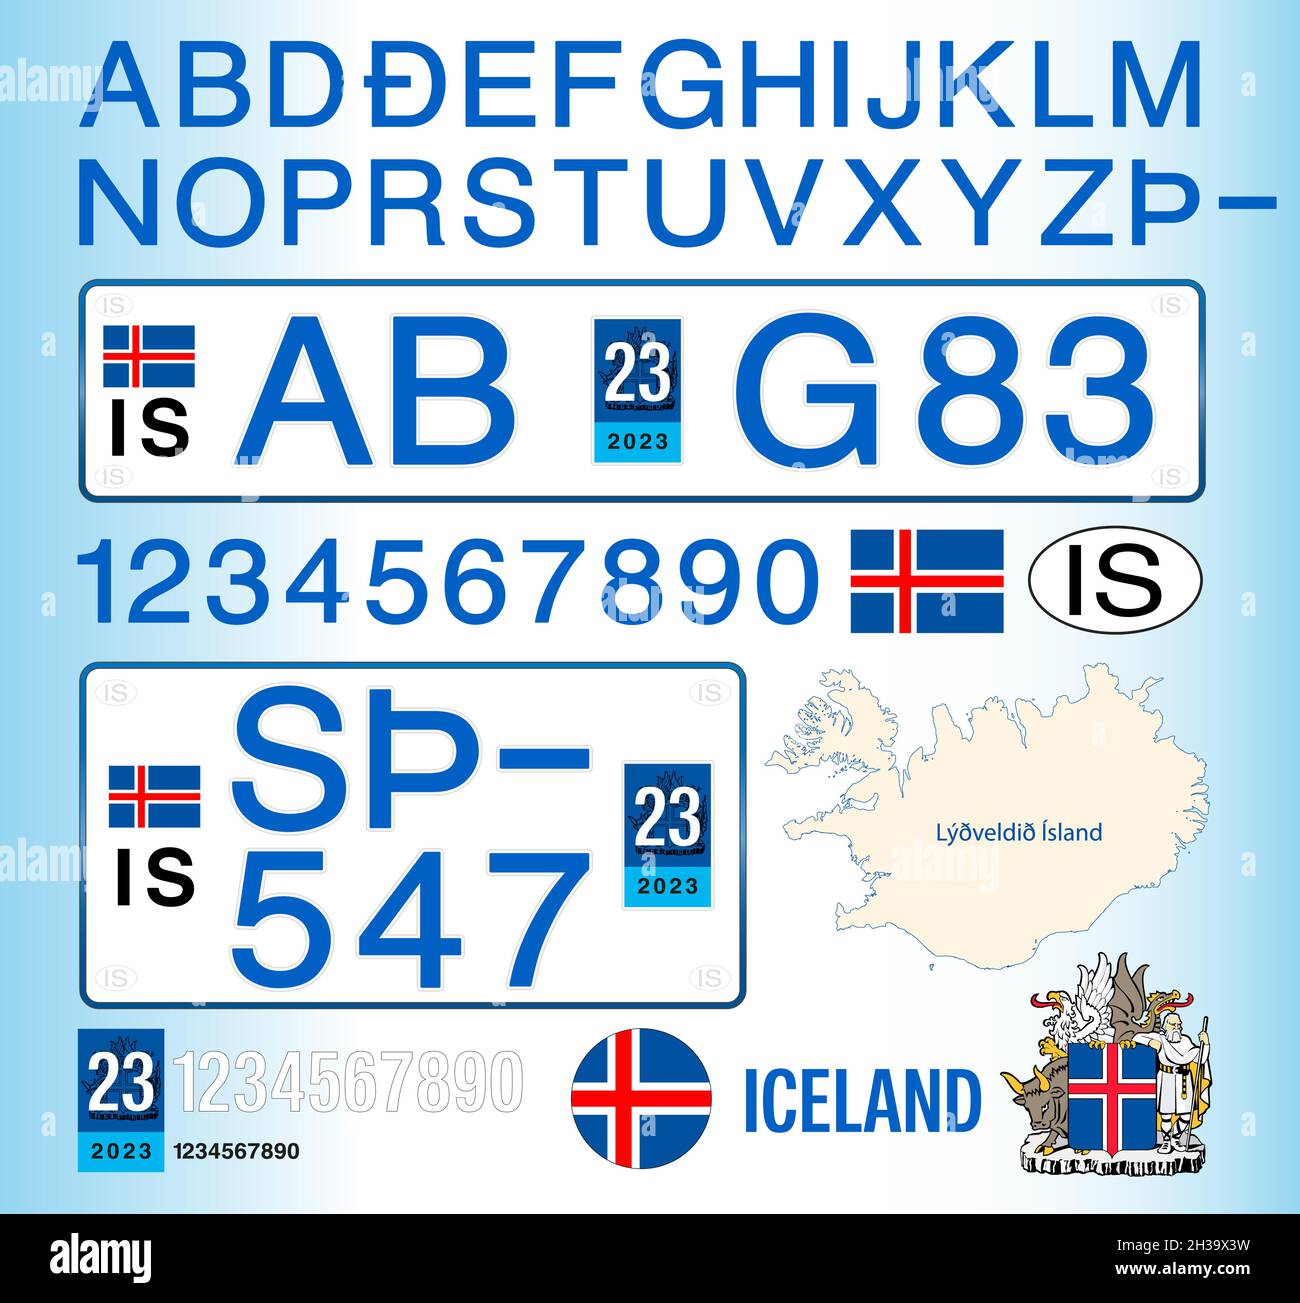 Iceland car license plate, letters, numbers and symbols, vector illustration Stock Vector